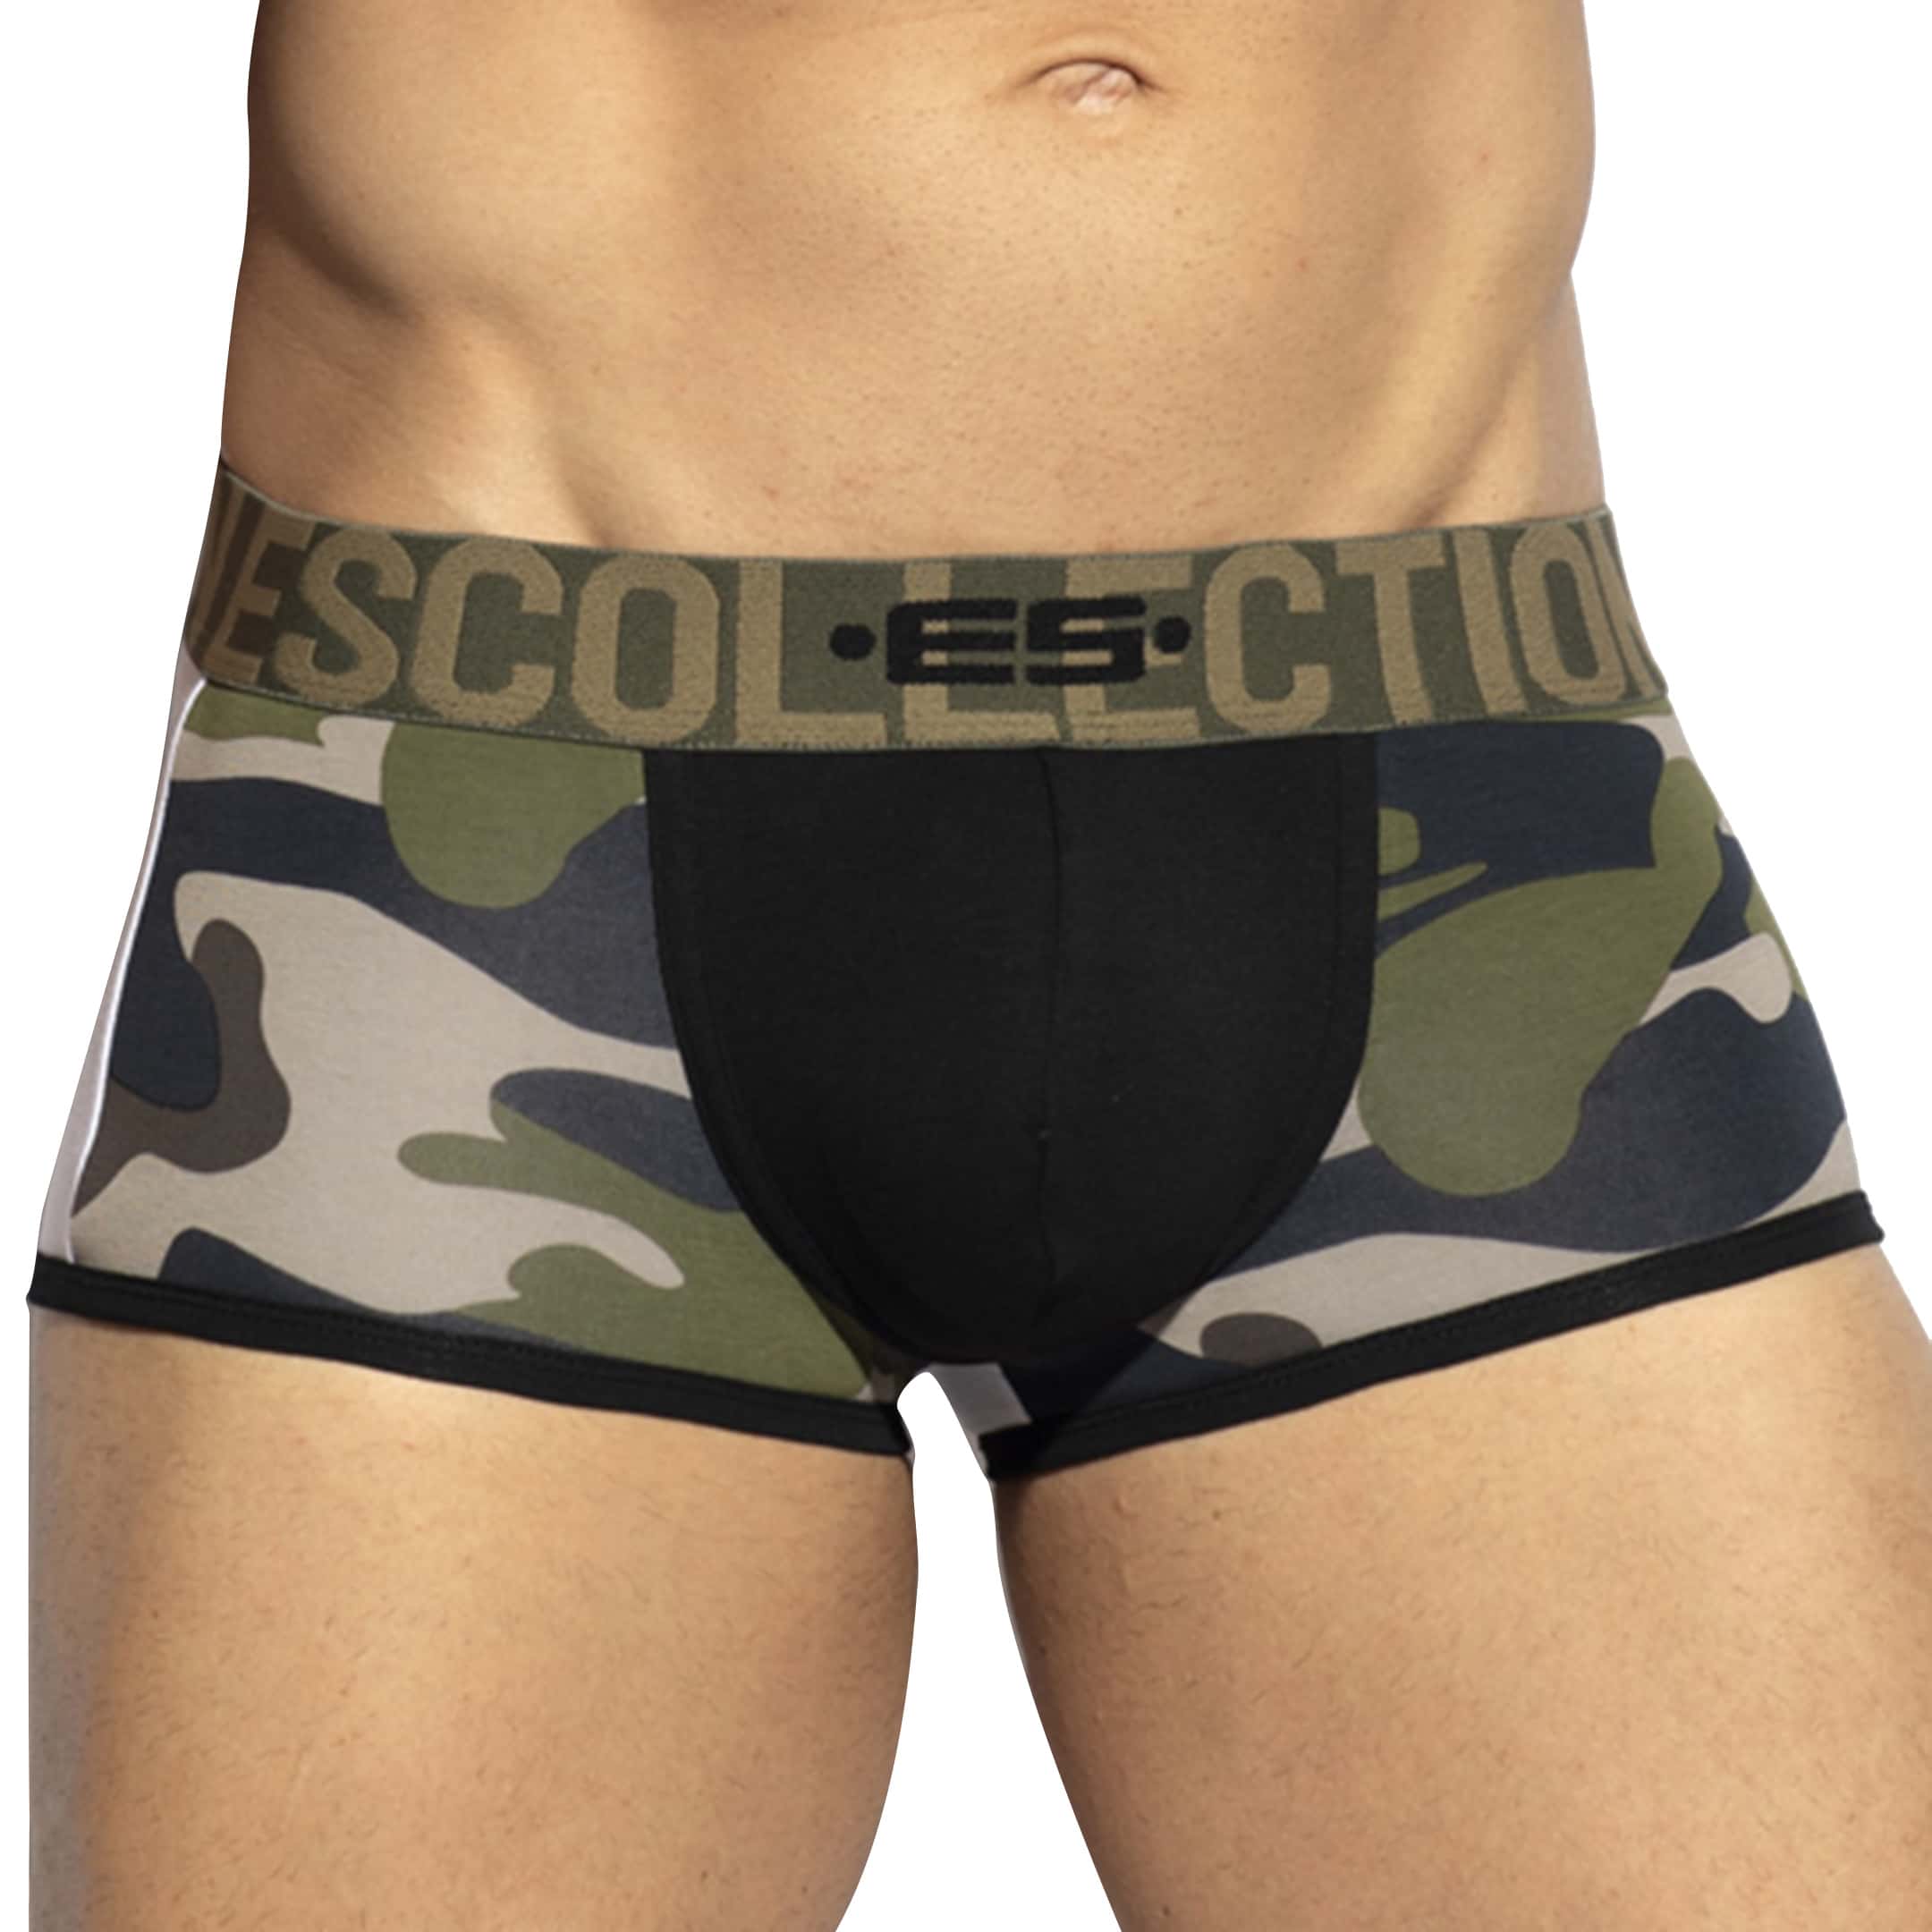 ES Collection Colorful Trunks - Black - Camo - White